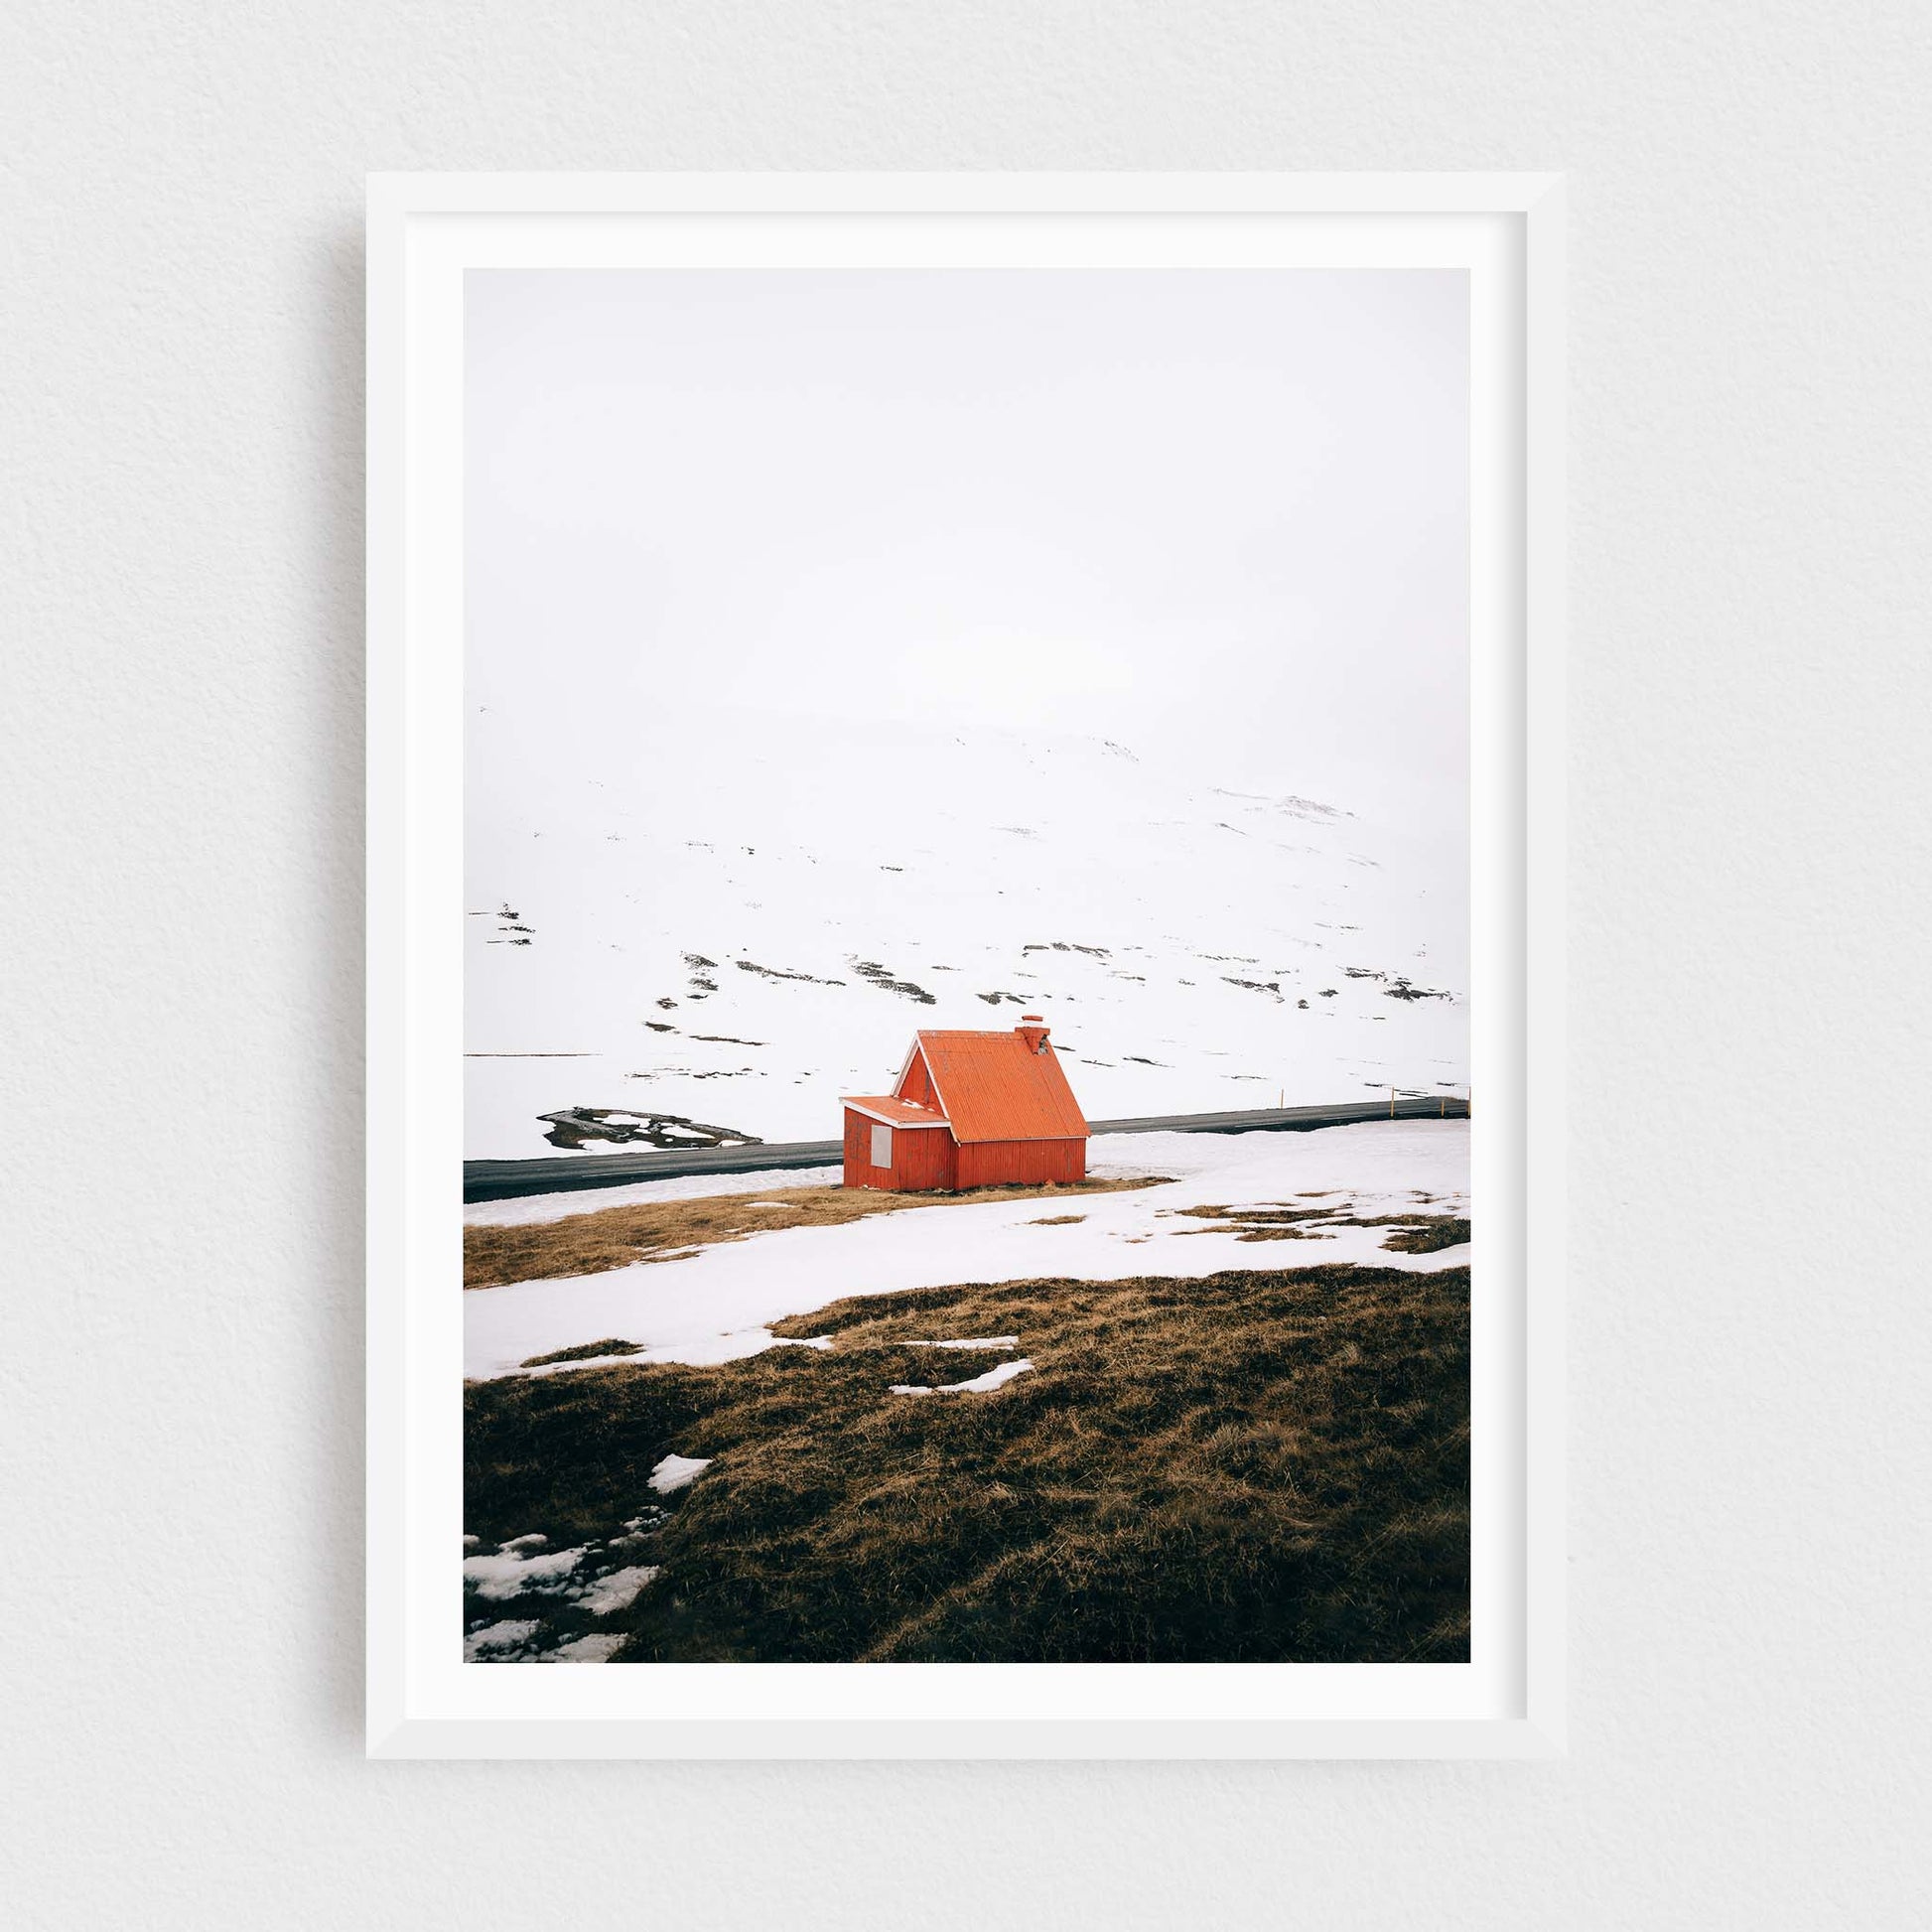 Iceland fine art photography print featuring a red cabin in winter, in a white frame